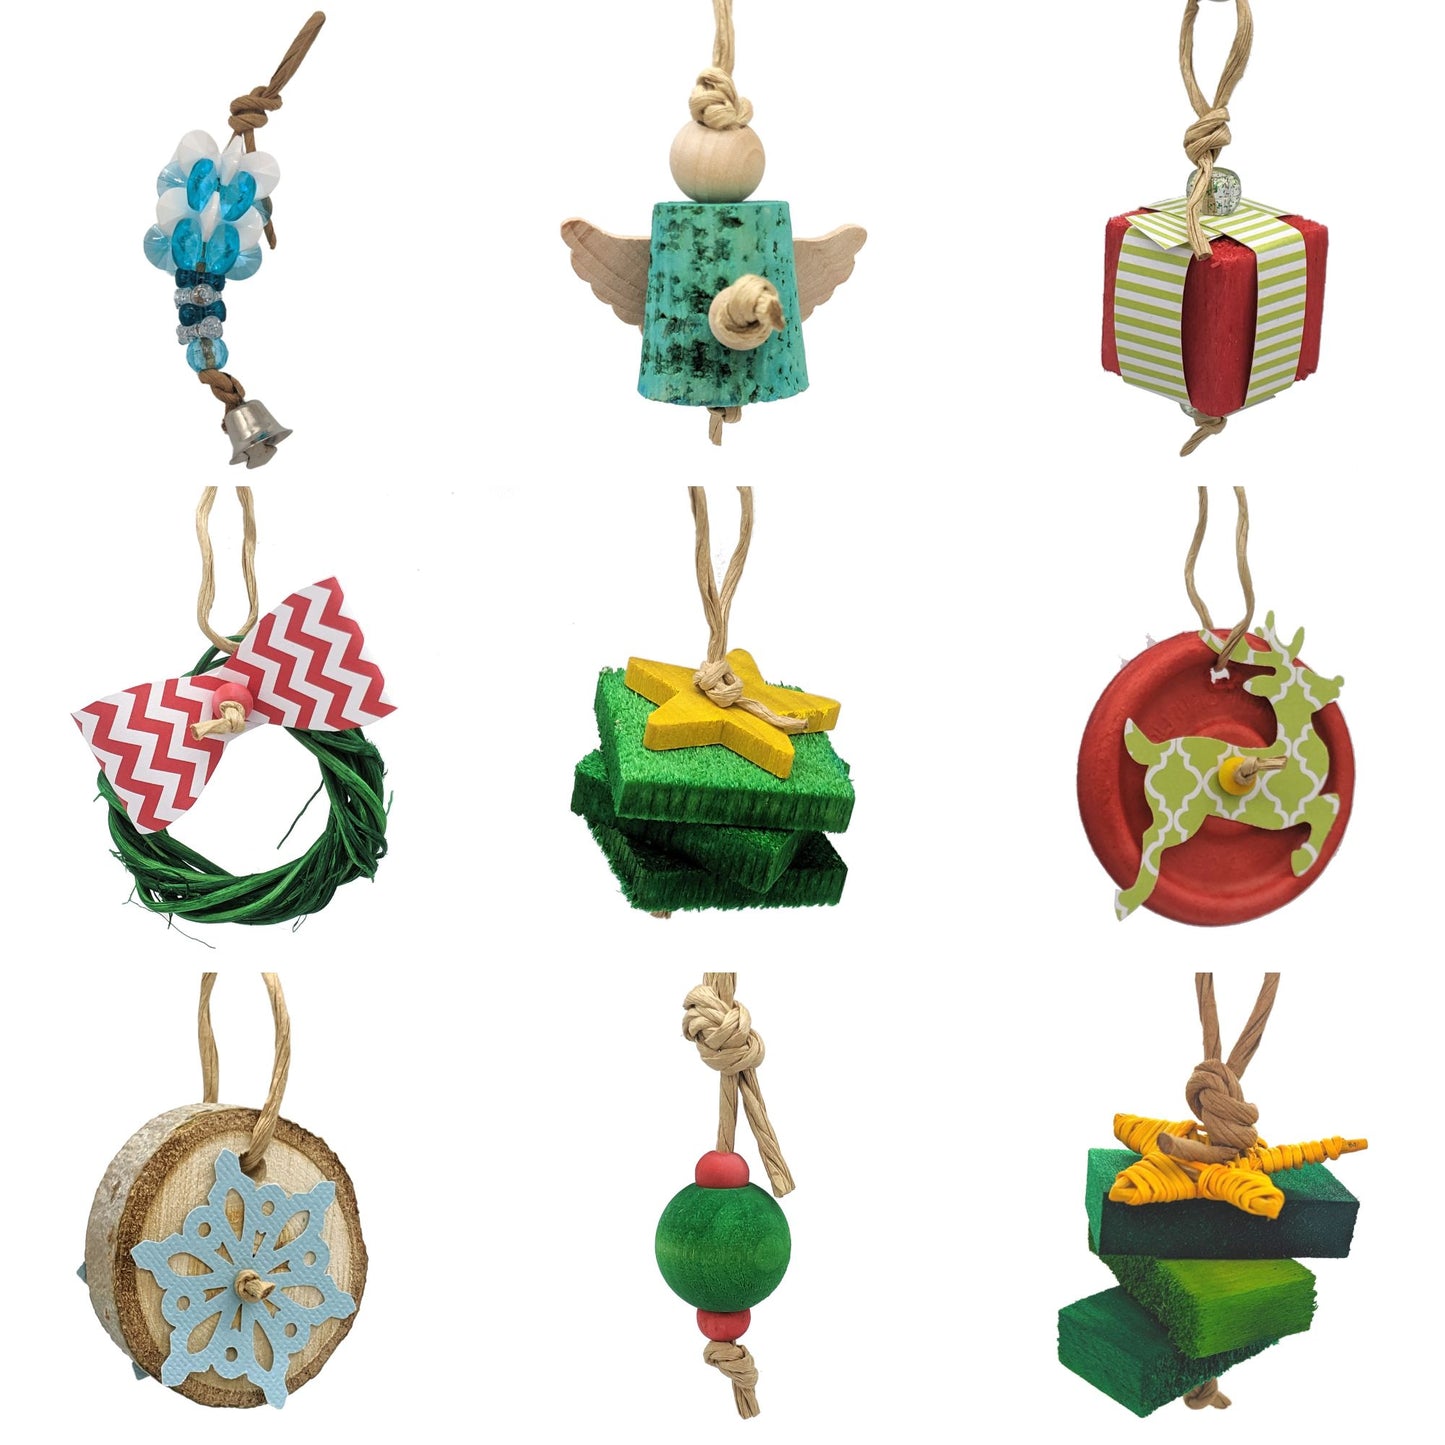 An assortment of Christmas ornaments made with bird safe materials